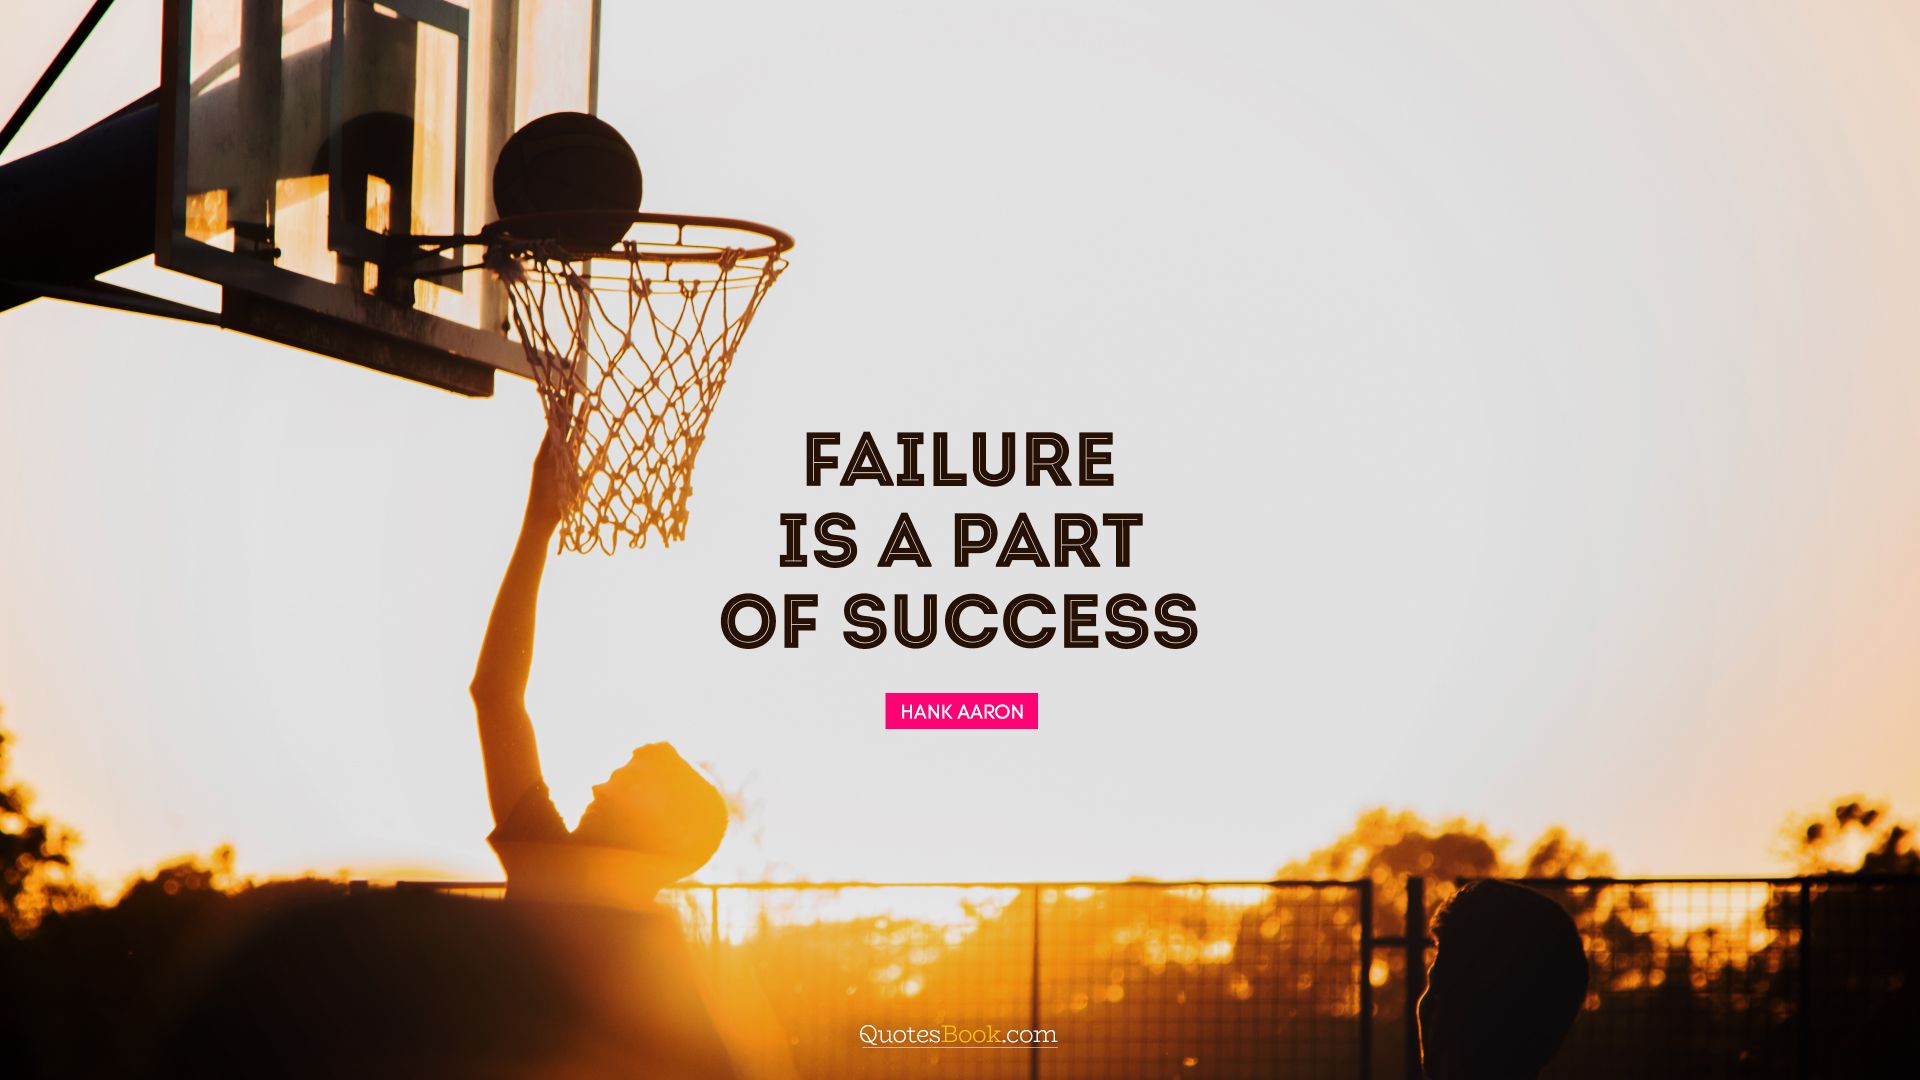 Failure is a part of success. - Quote by Hank Aaron